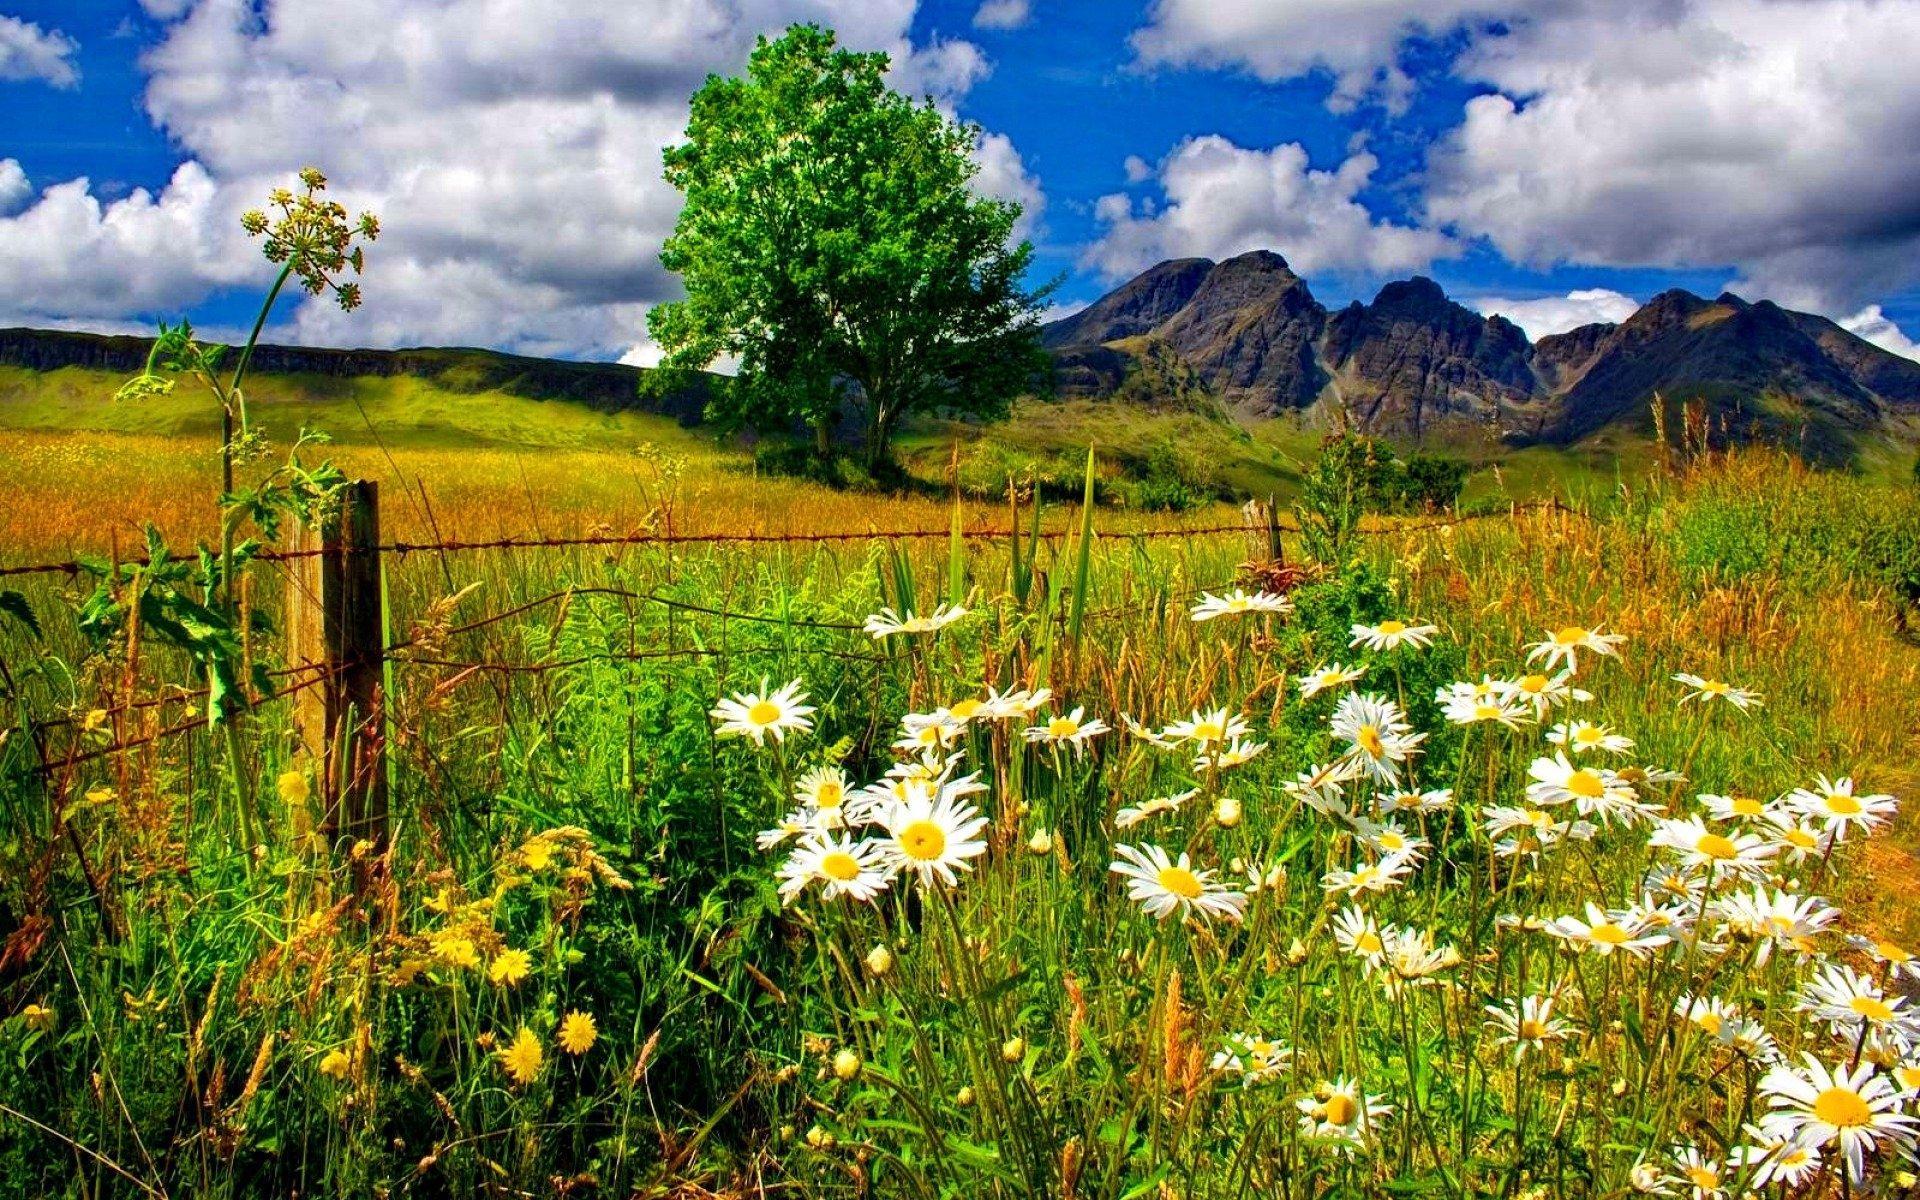 Daisies Growing in Mountain Field HD Wallpaper. Background Image